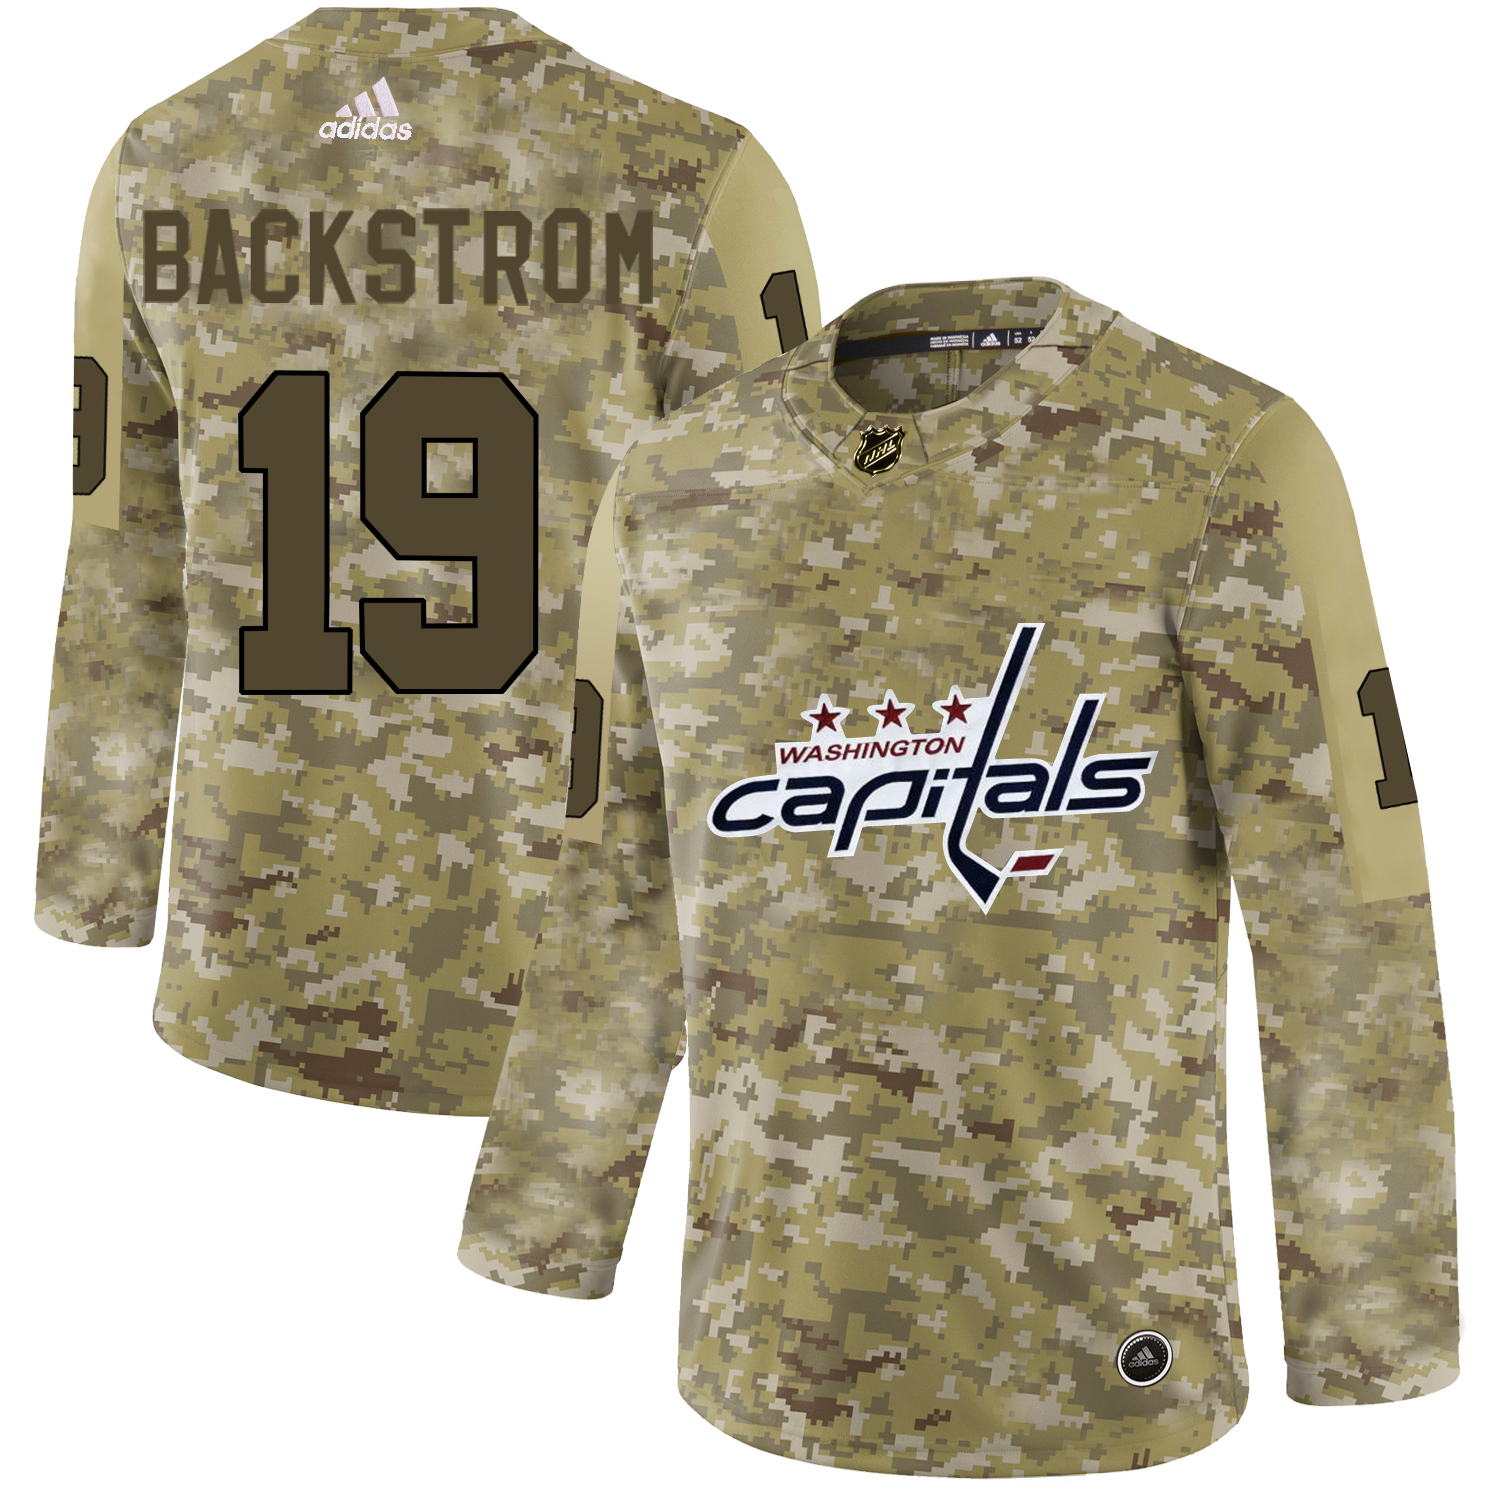 Adidas Capitals #19 Nicklas Backstrom Camo Authentic Stitched NHL Jersey